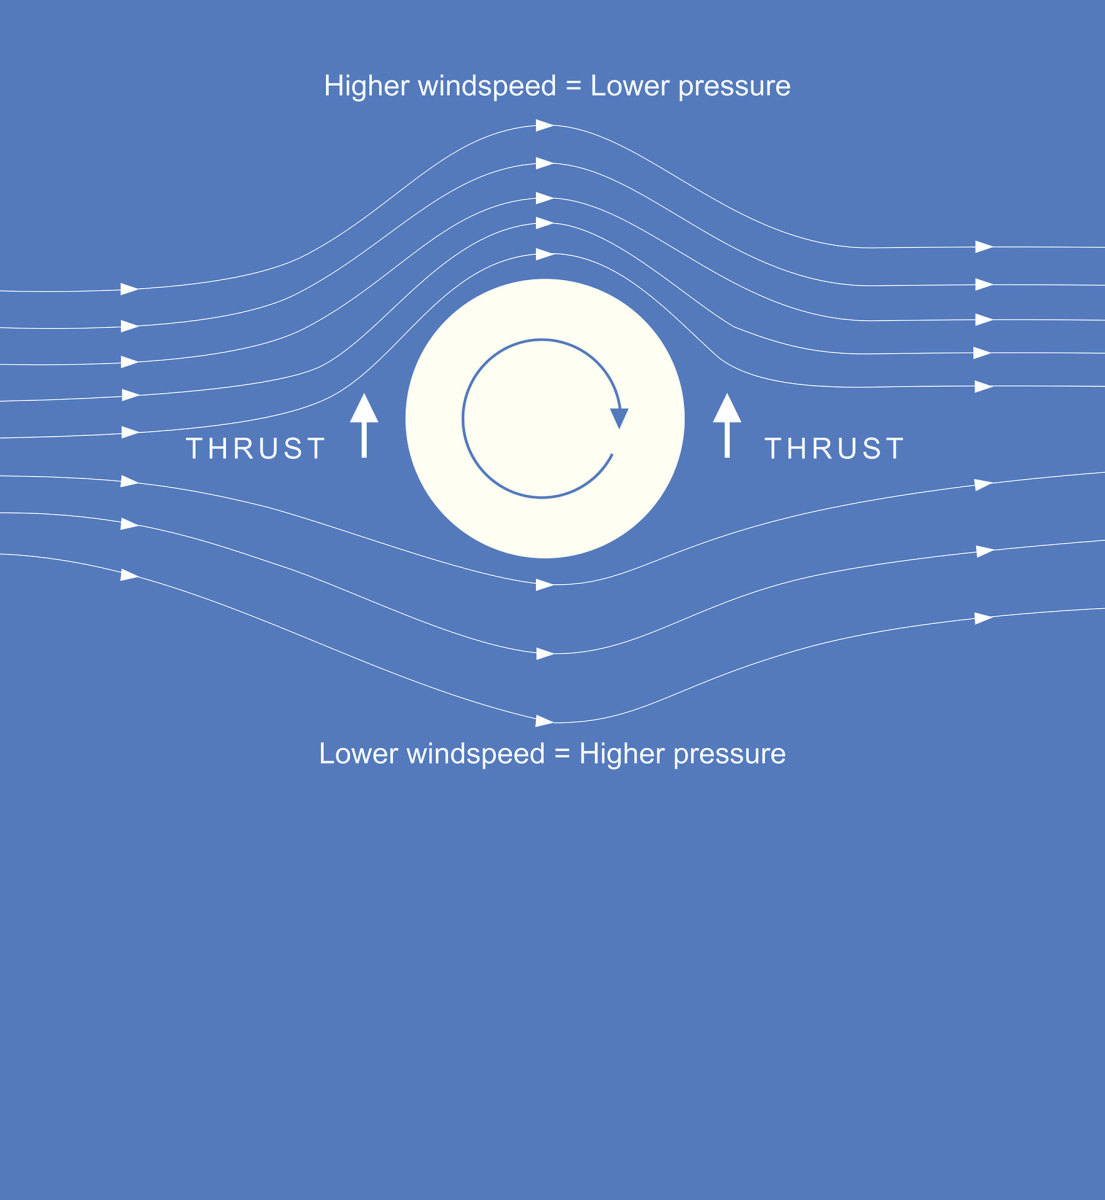 Flettner rotors take advantage of the Magnus effect in 
order to “sail“ without a sail. When the cylinder spins 
around an axis at an angle to the wind, the cylinder is 
deflected or pushed toward the low-pressure side. 